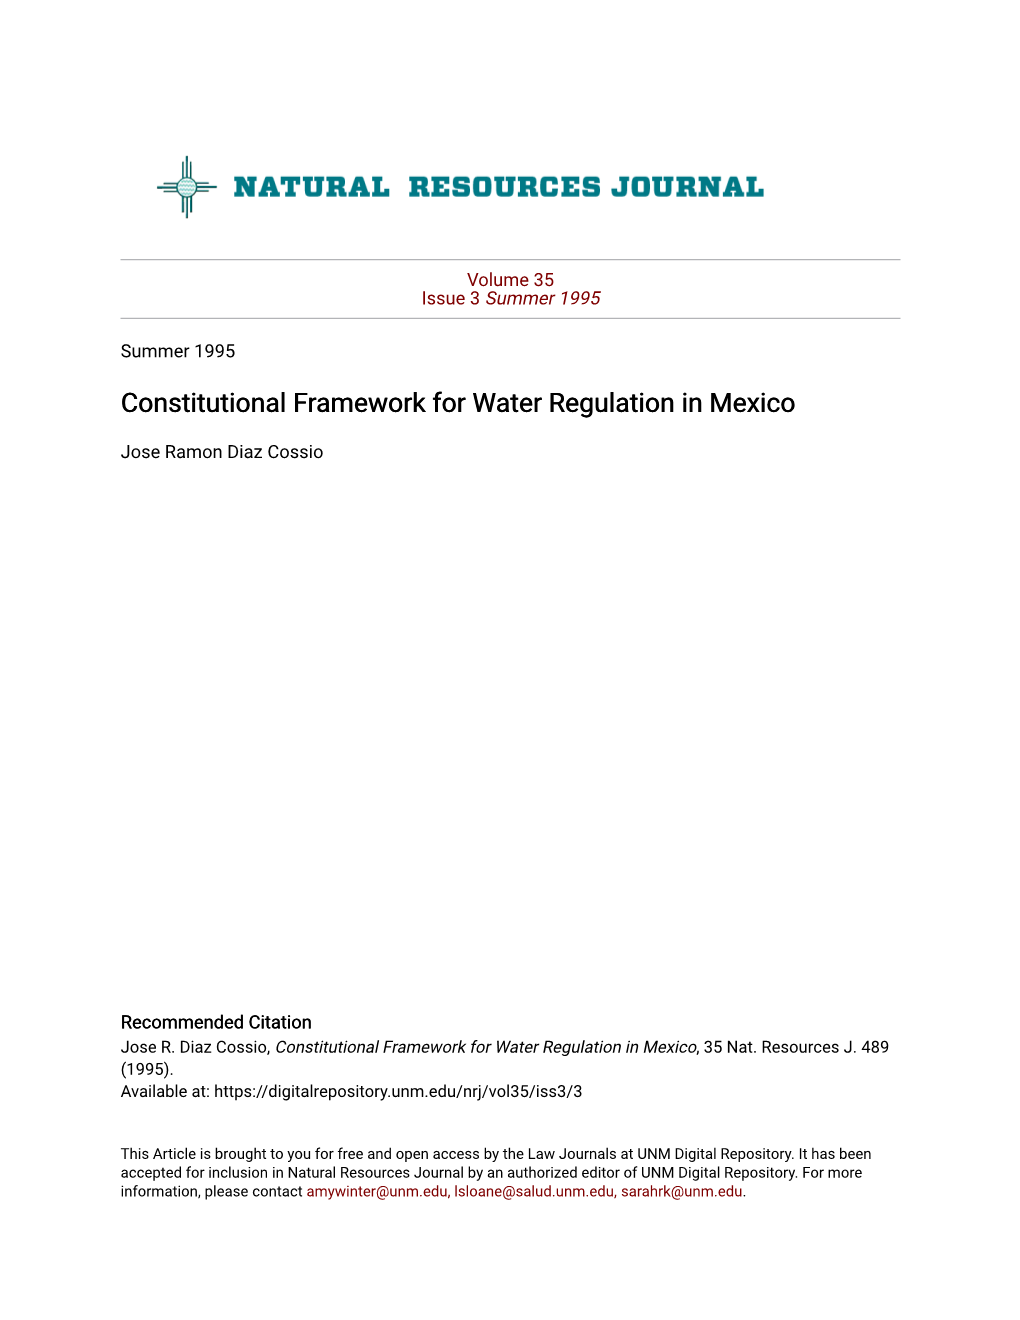 Constitutional Framework for Water Regulation in Mexico